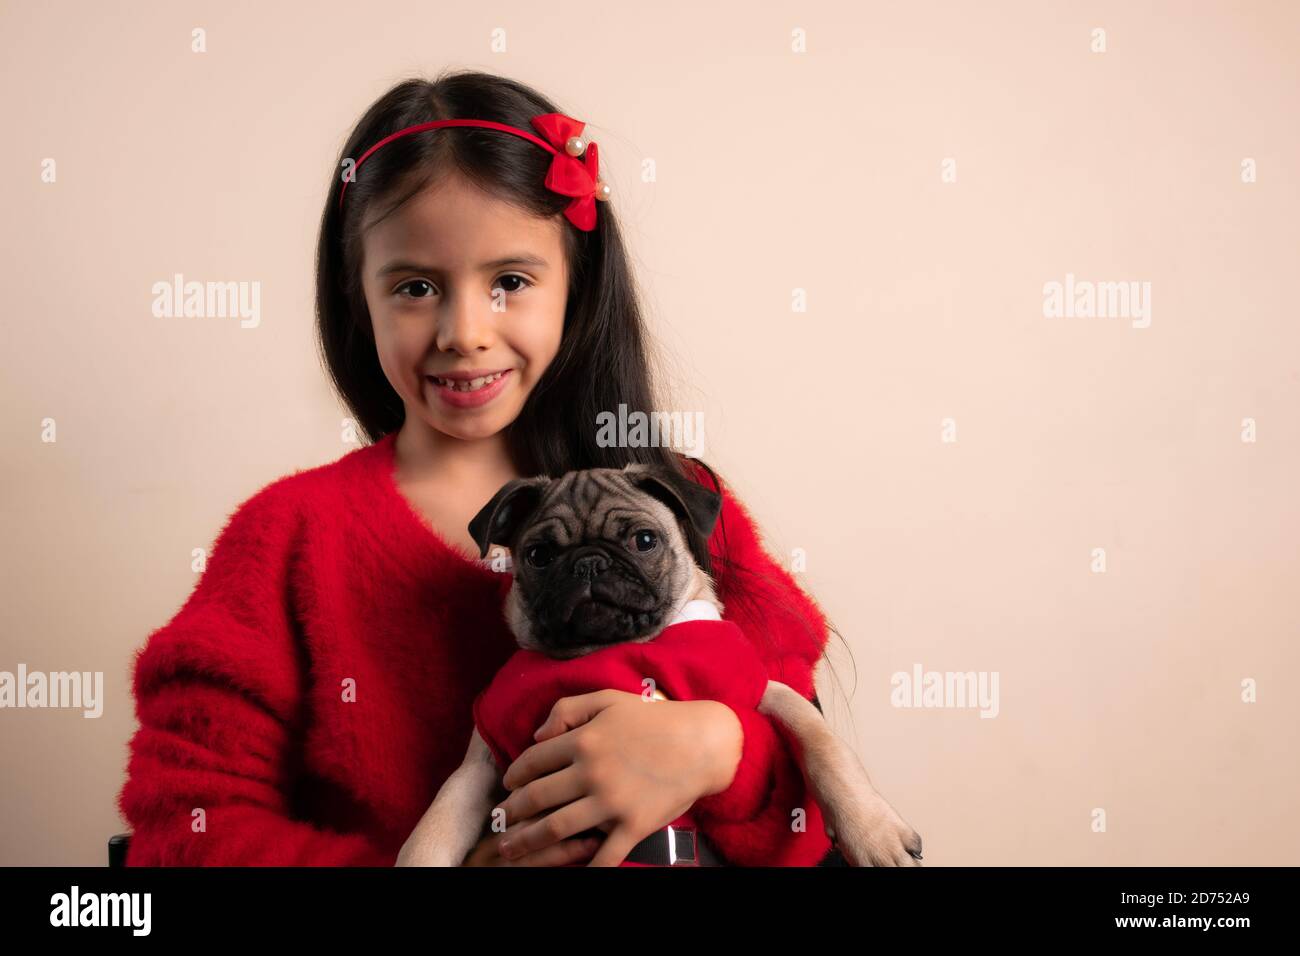 Smiling girl with bow on head holding a cute pug puppy Stock Photo